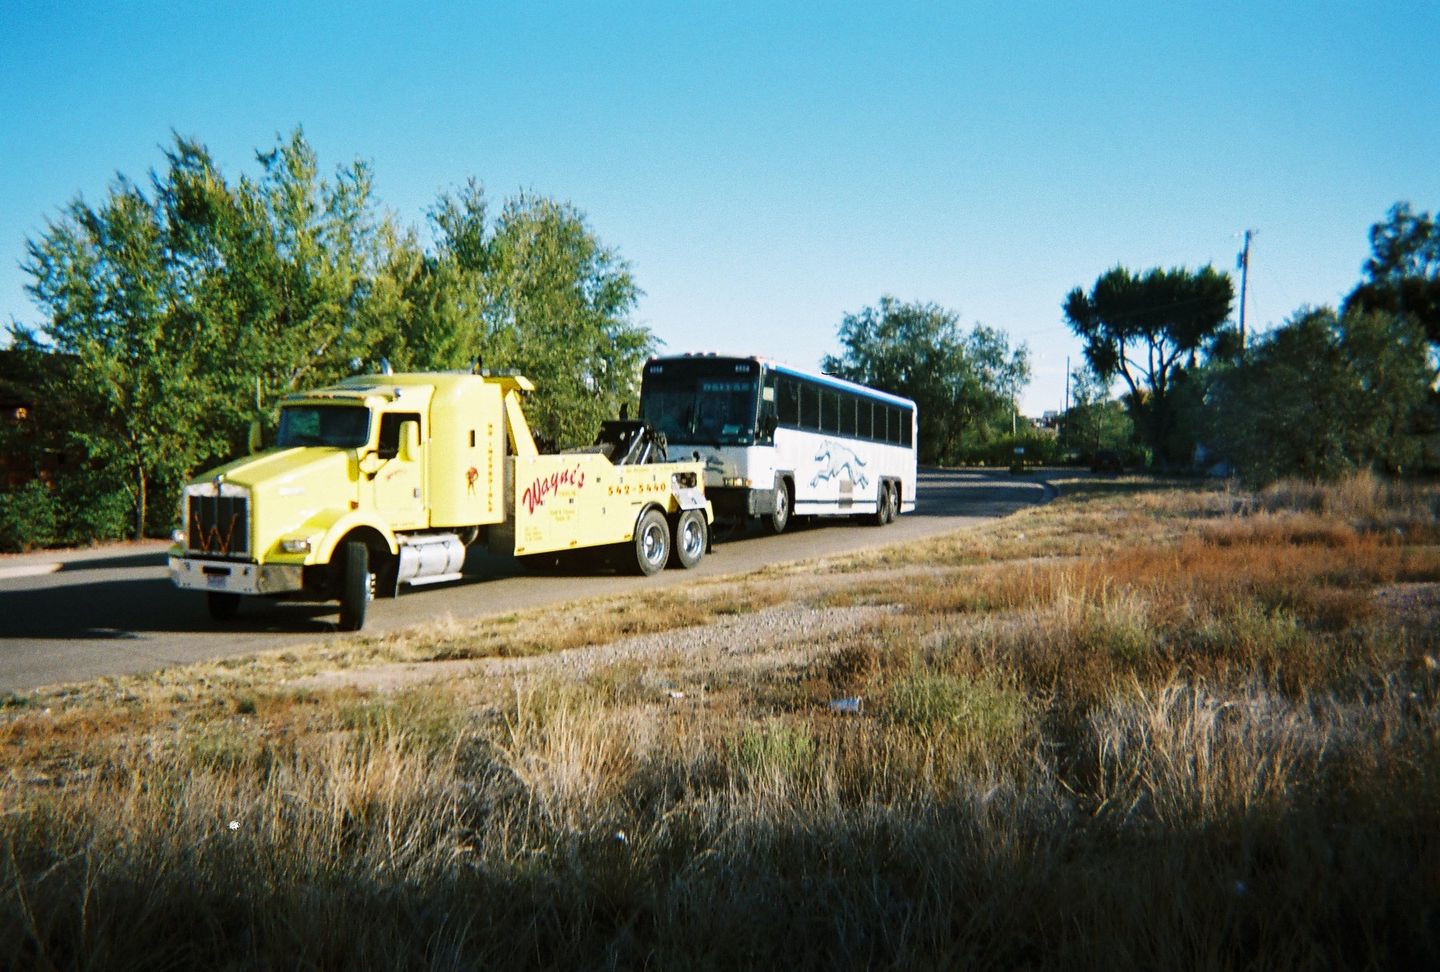 Tow Truck Pulling Bus - Towing Services in Pueblo,CO and the Surrounding Area